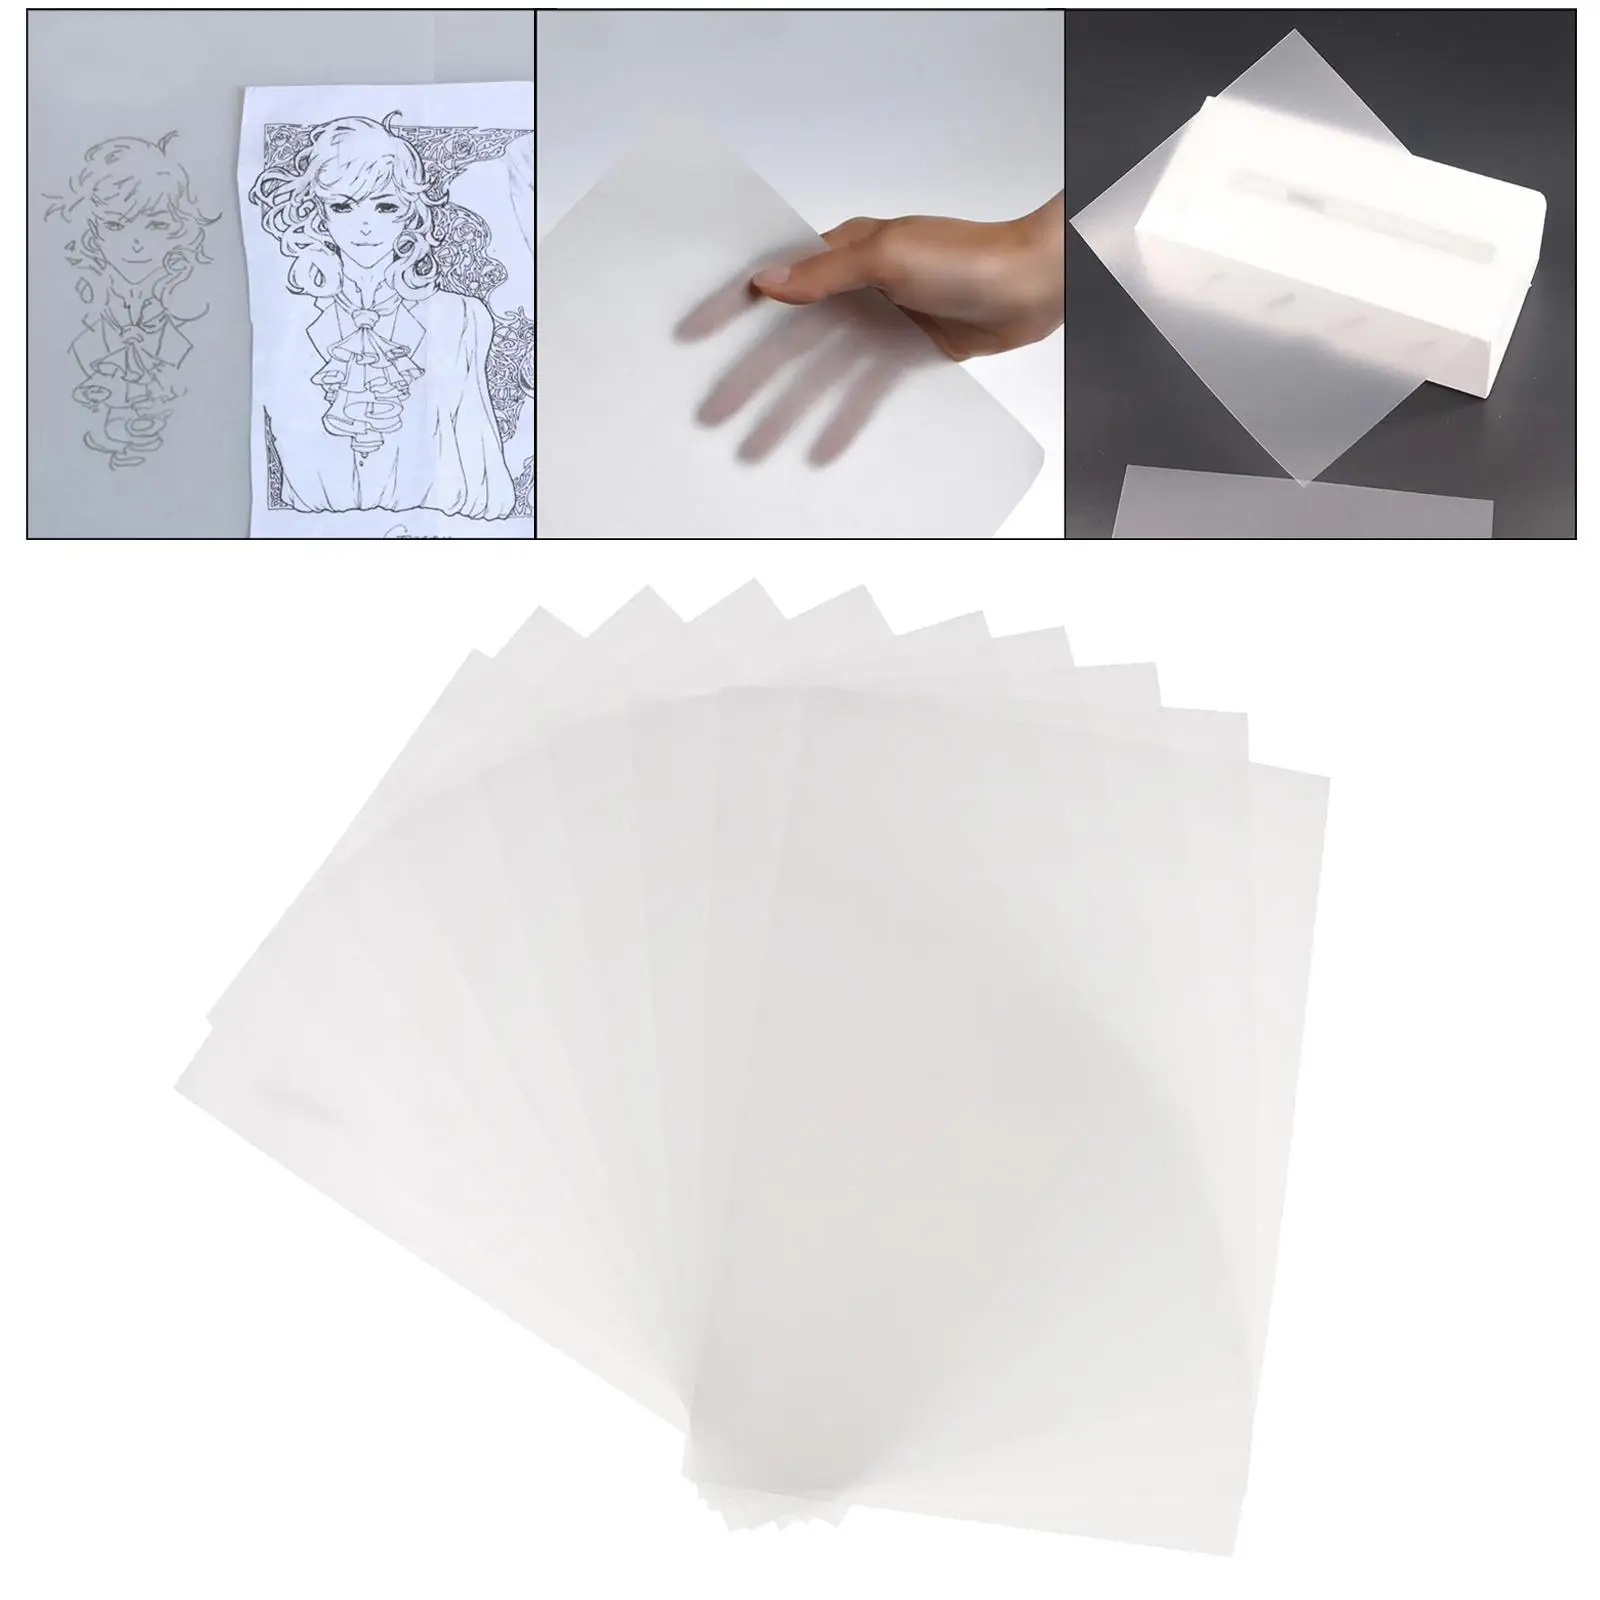 12 Sheets White Translucent Tracing Paper 6x Printing Sketching